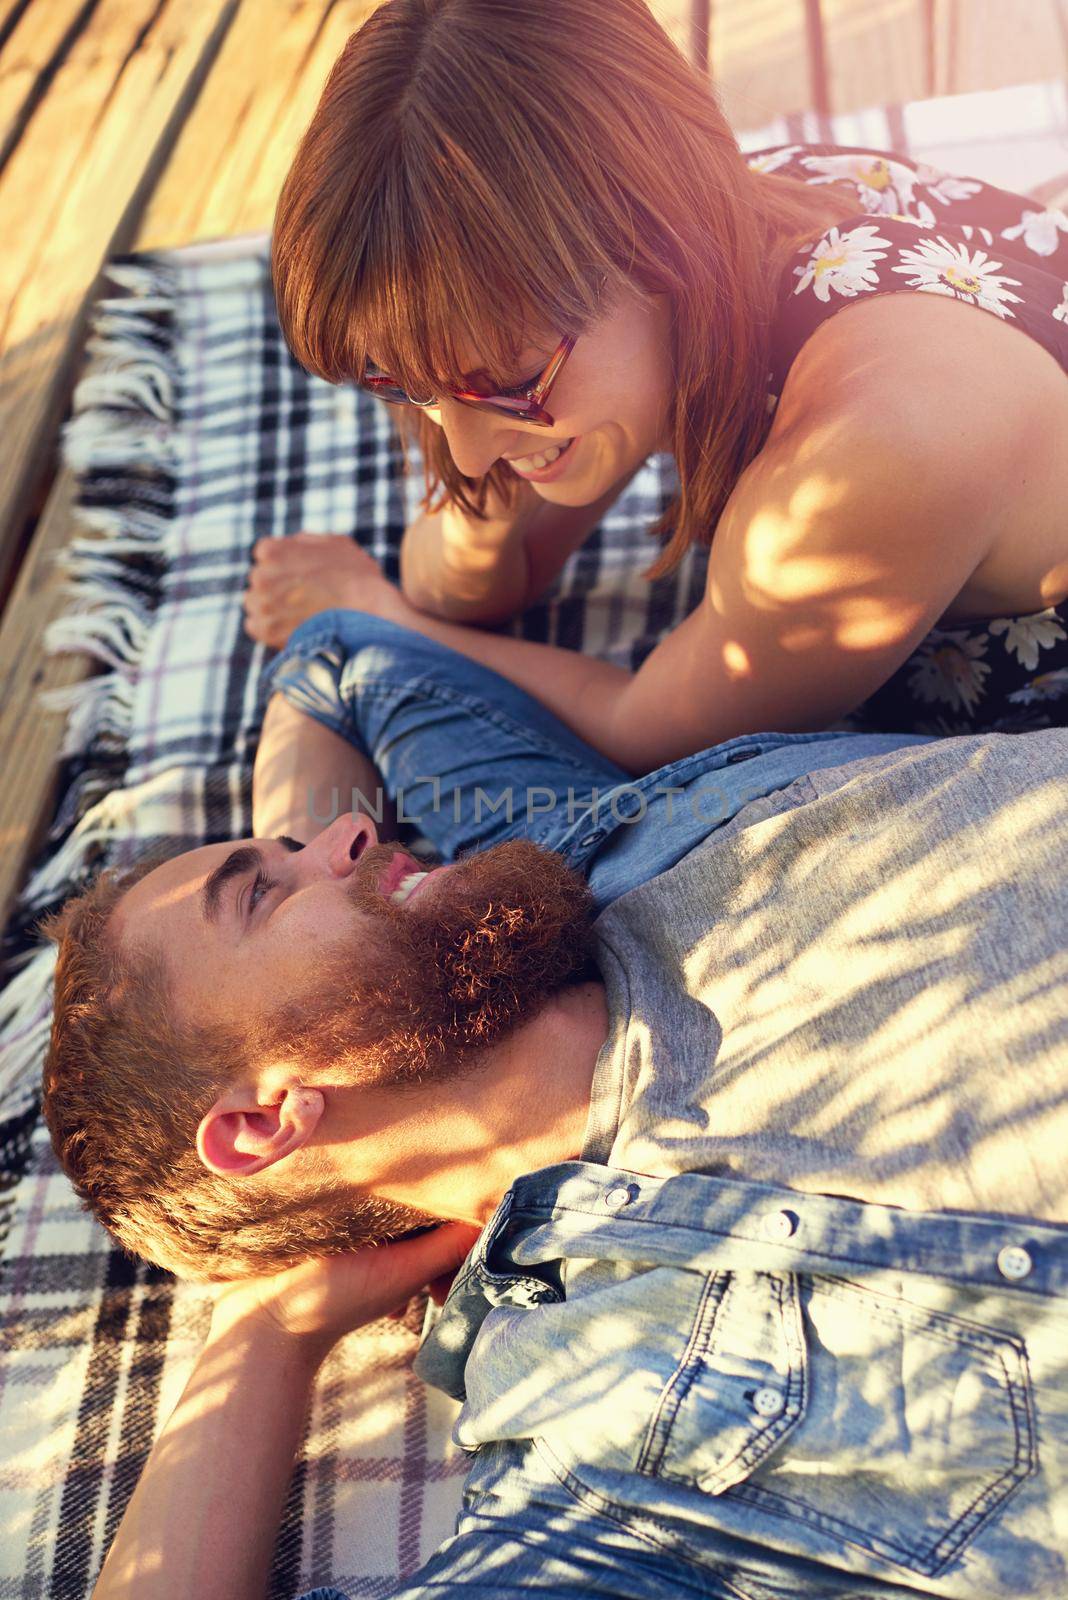 Everyday is perfect together. an affectionate young couple lying on a blanket outdoors